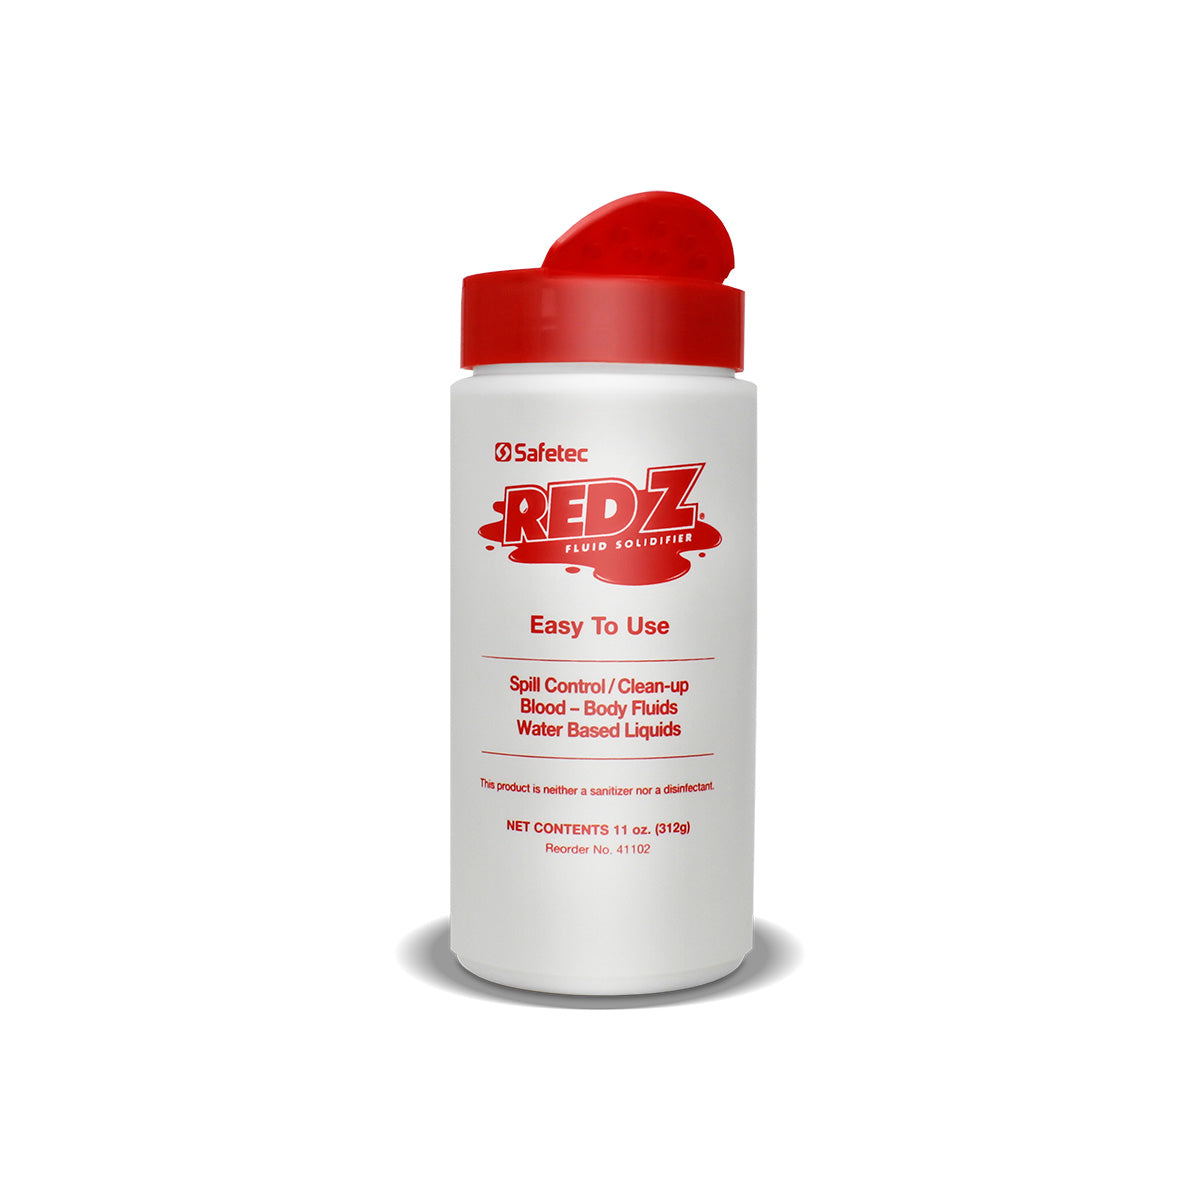 Safetec Red Z Spill Control Solidifier, 11 oz. Shaker top Bottles